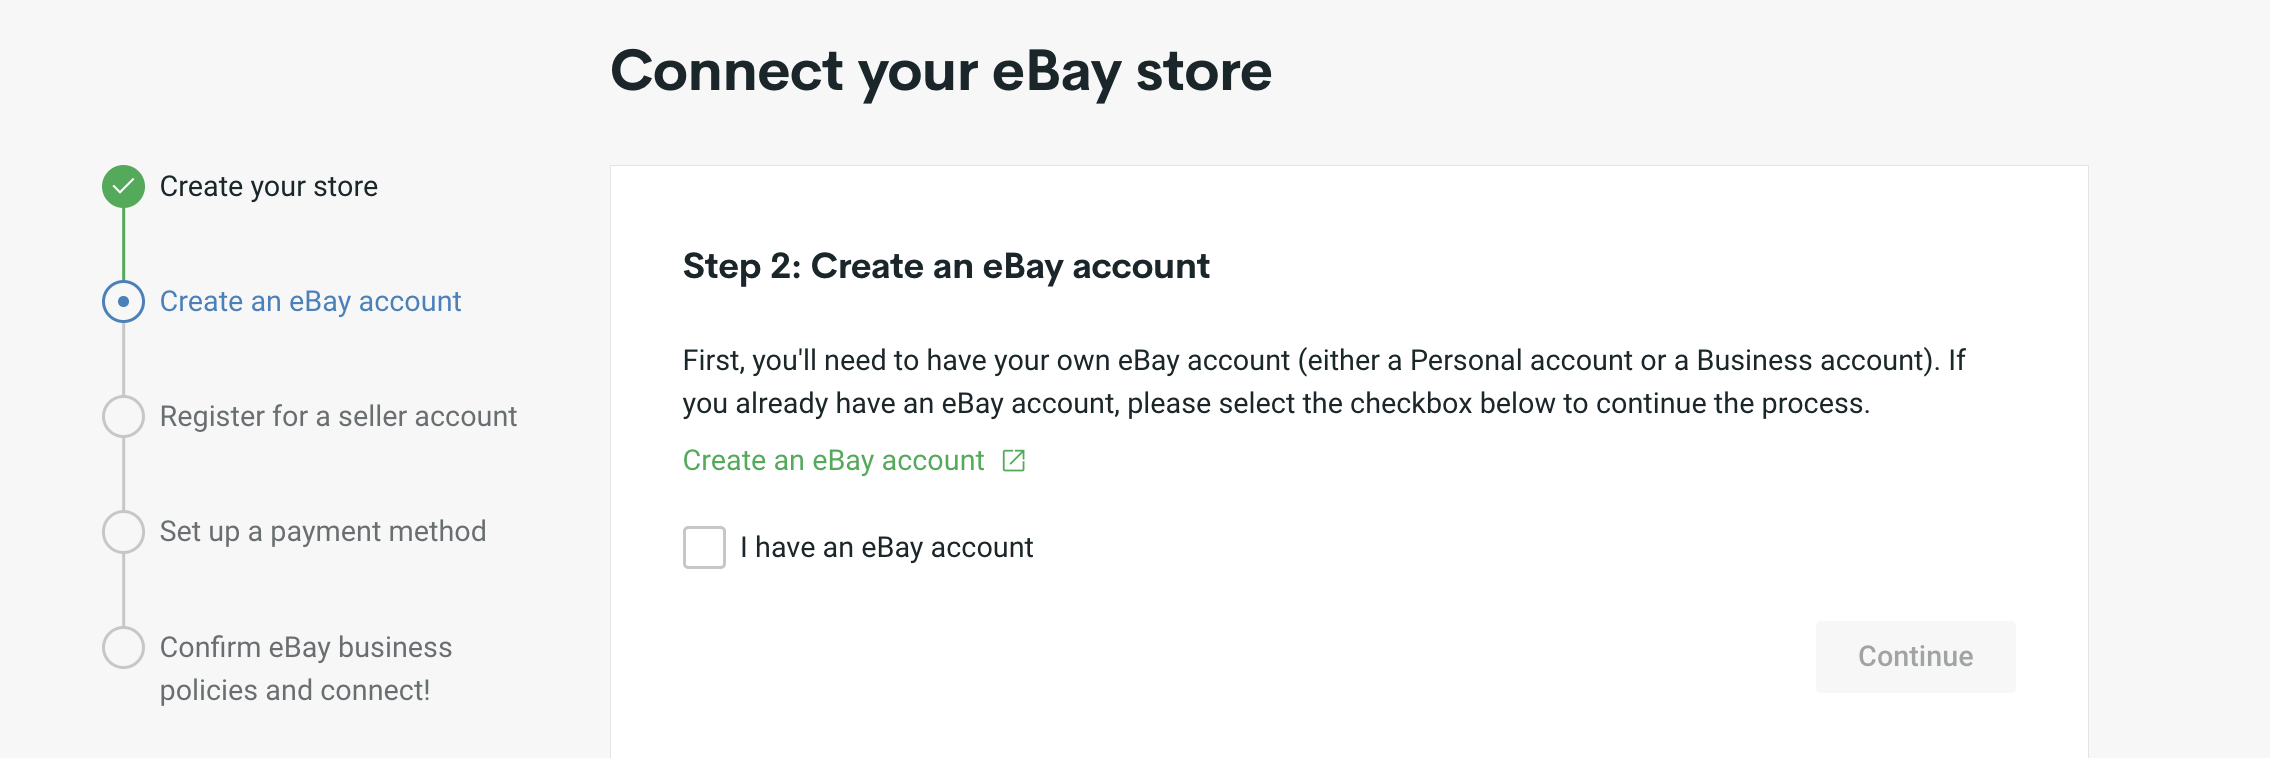 connect-ebay-2.png